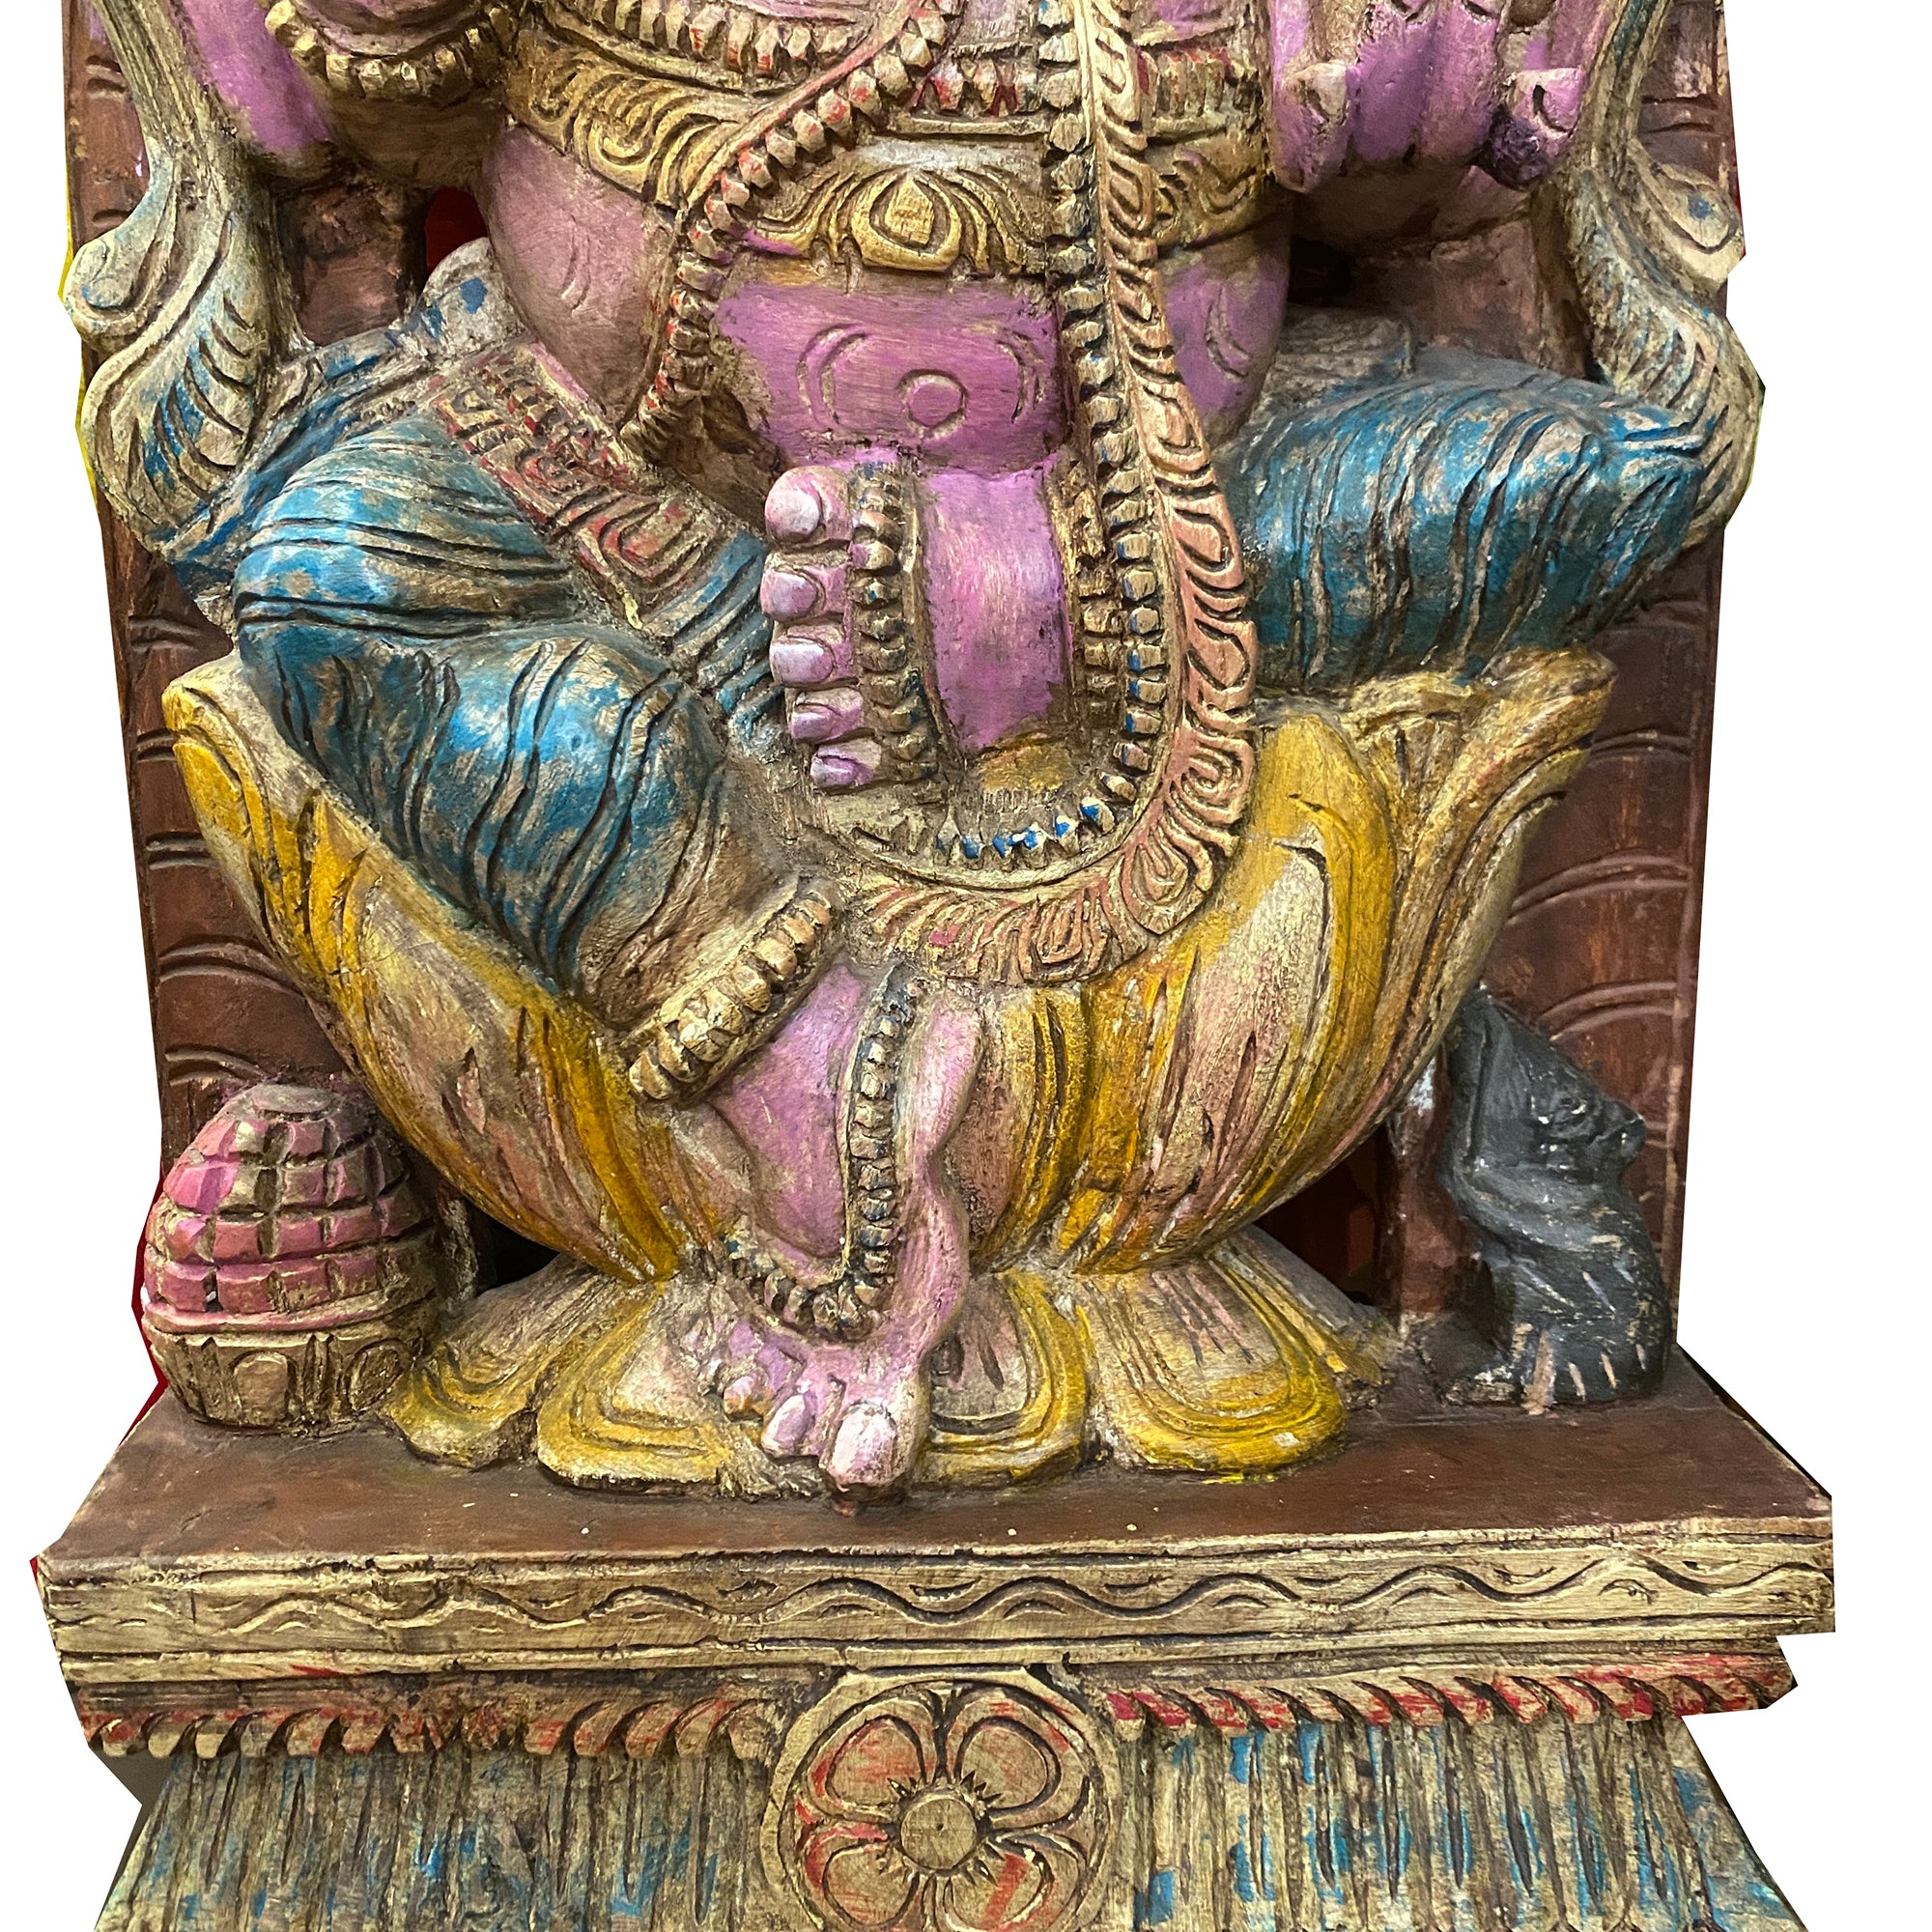 Pink Ganesh Hand-painted & Carved Murti - Vintage India NYC